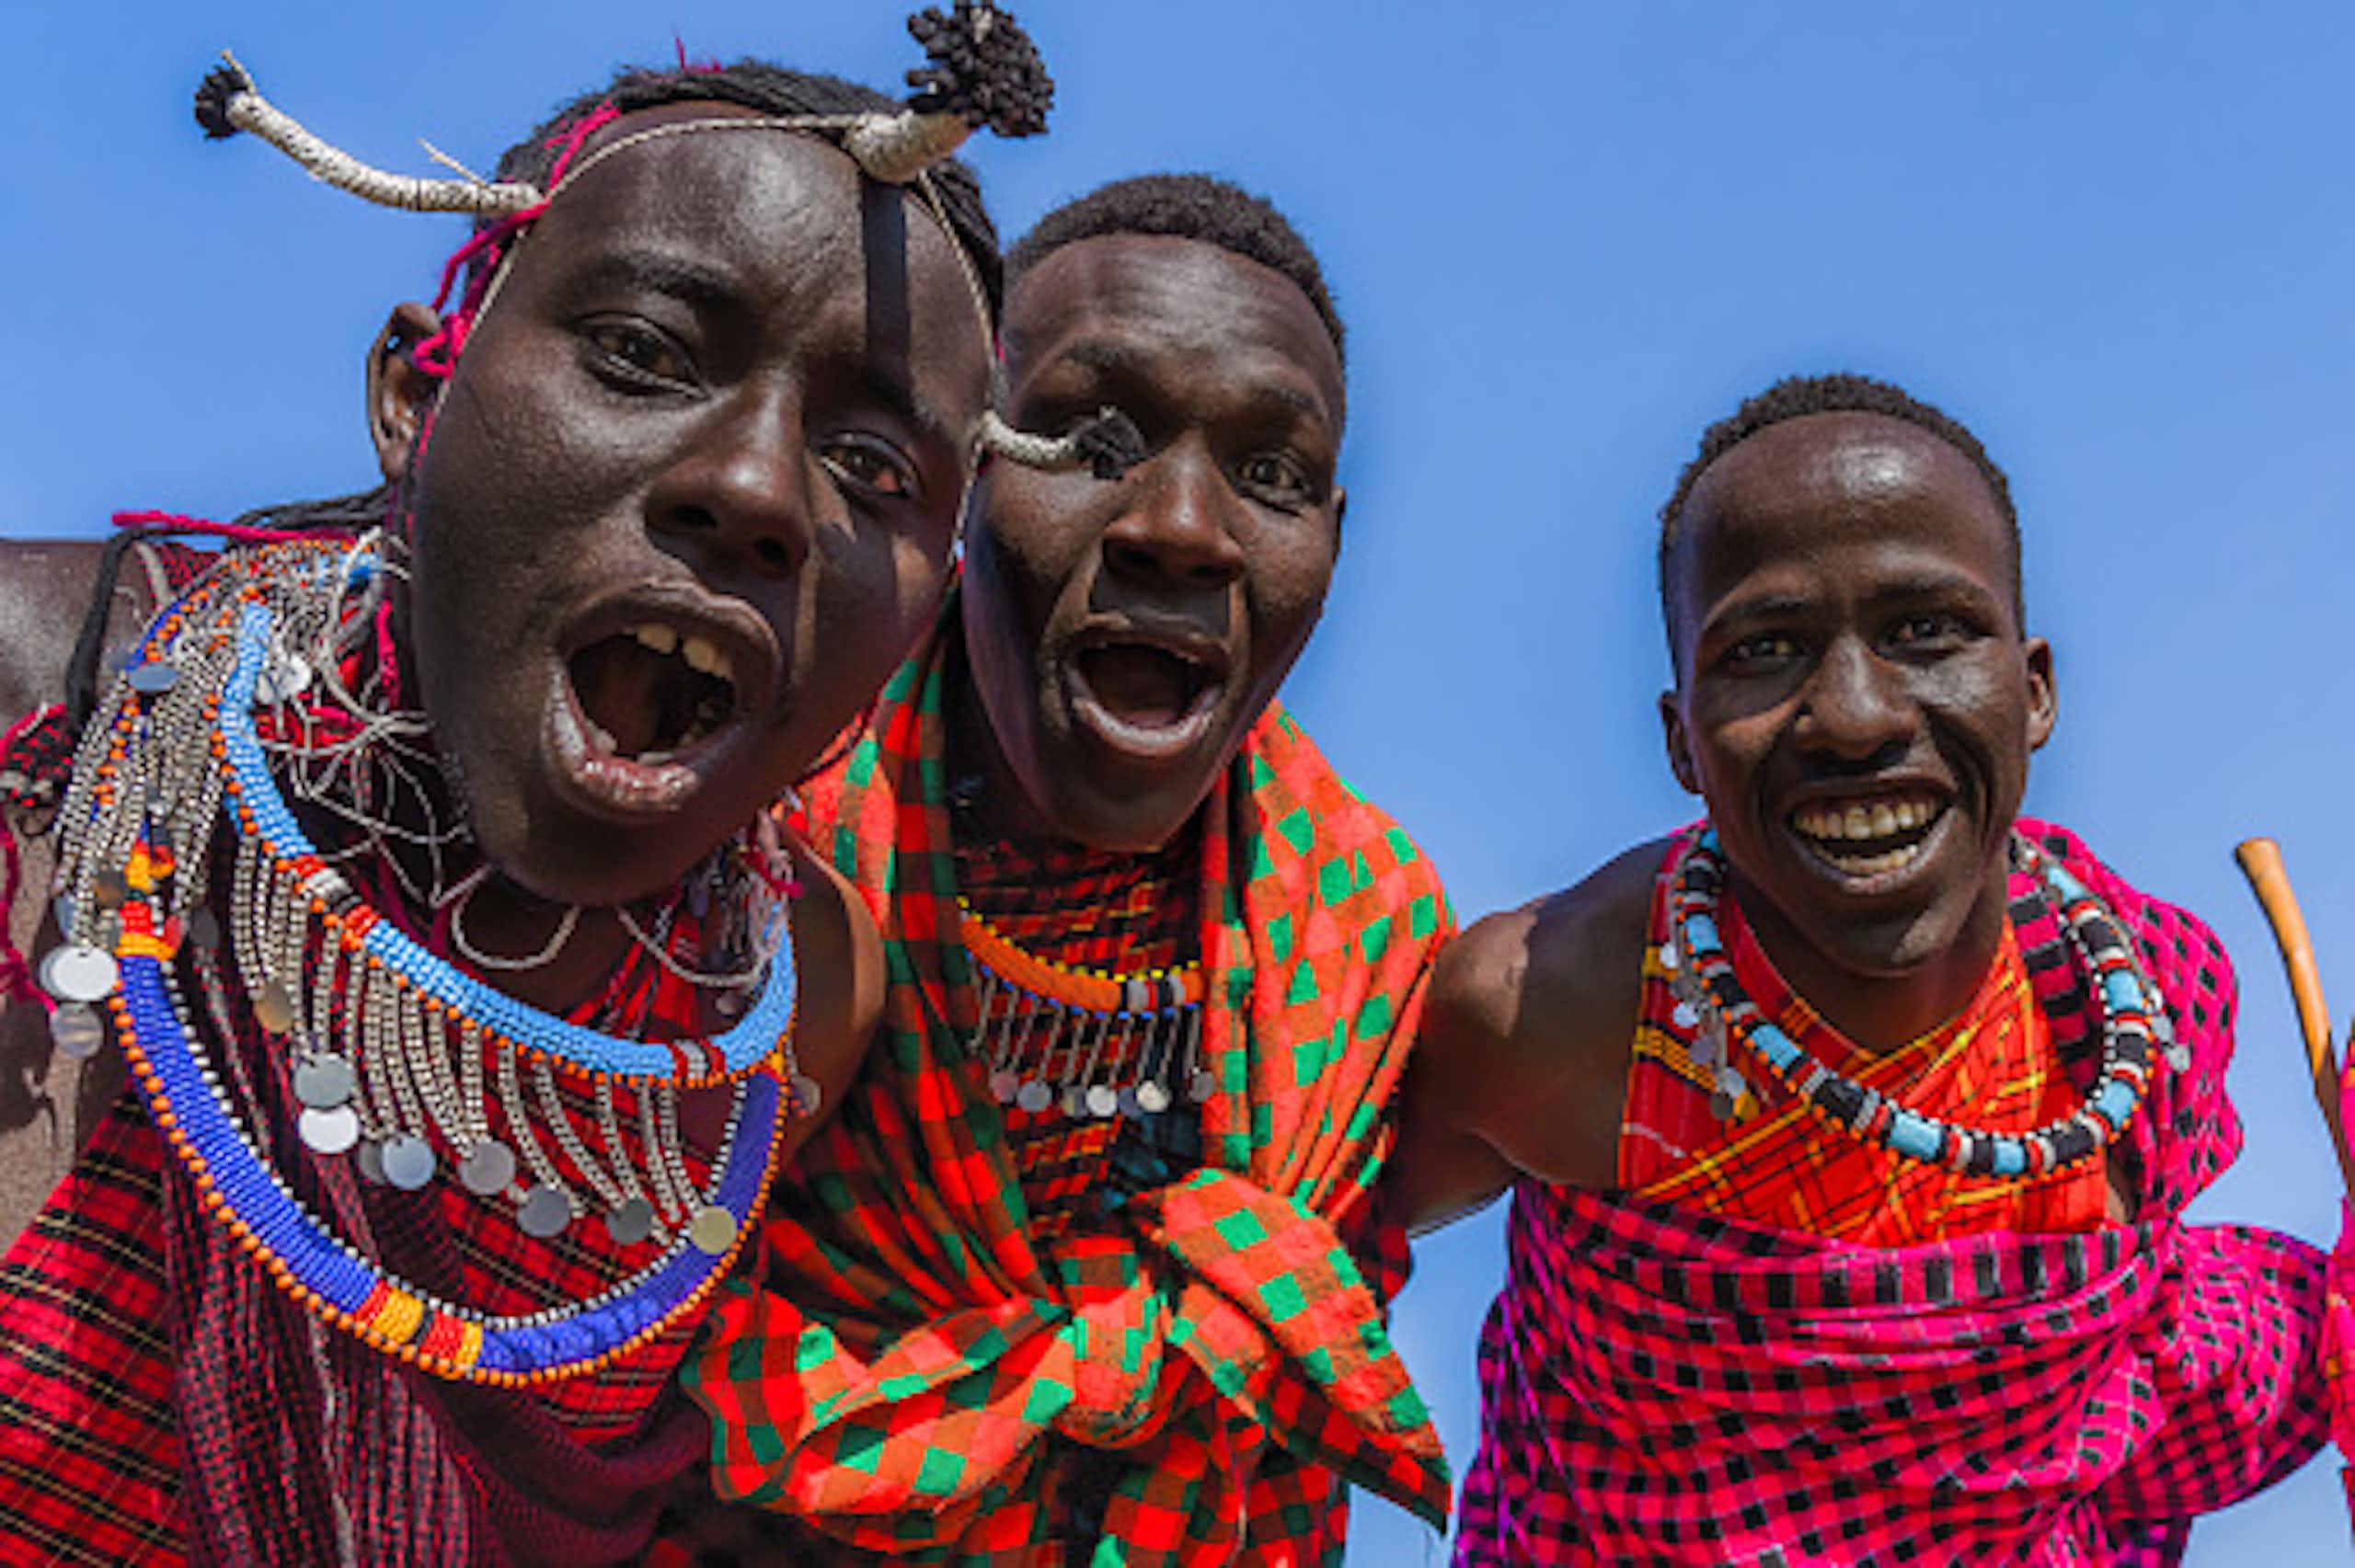 Three young Maasai men in brightly coloured wraps and beads, leaning towards the camera with open mouths